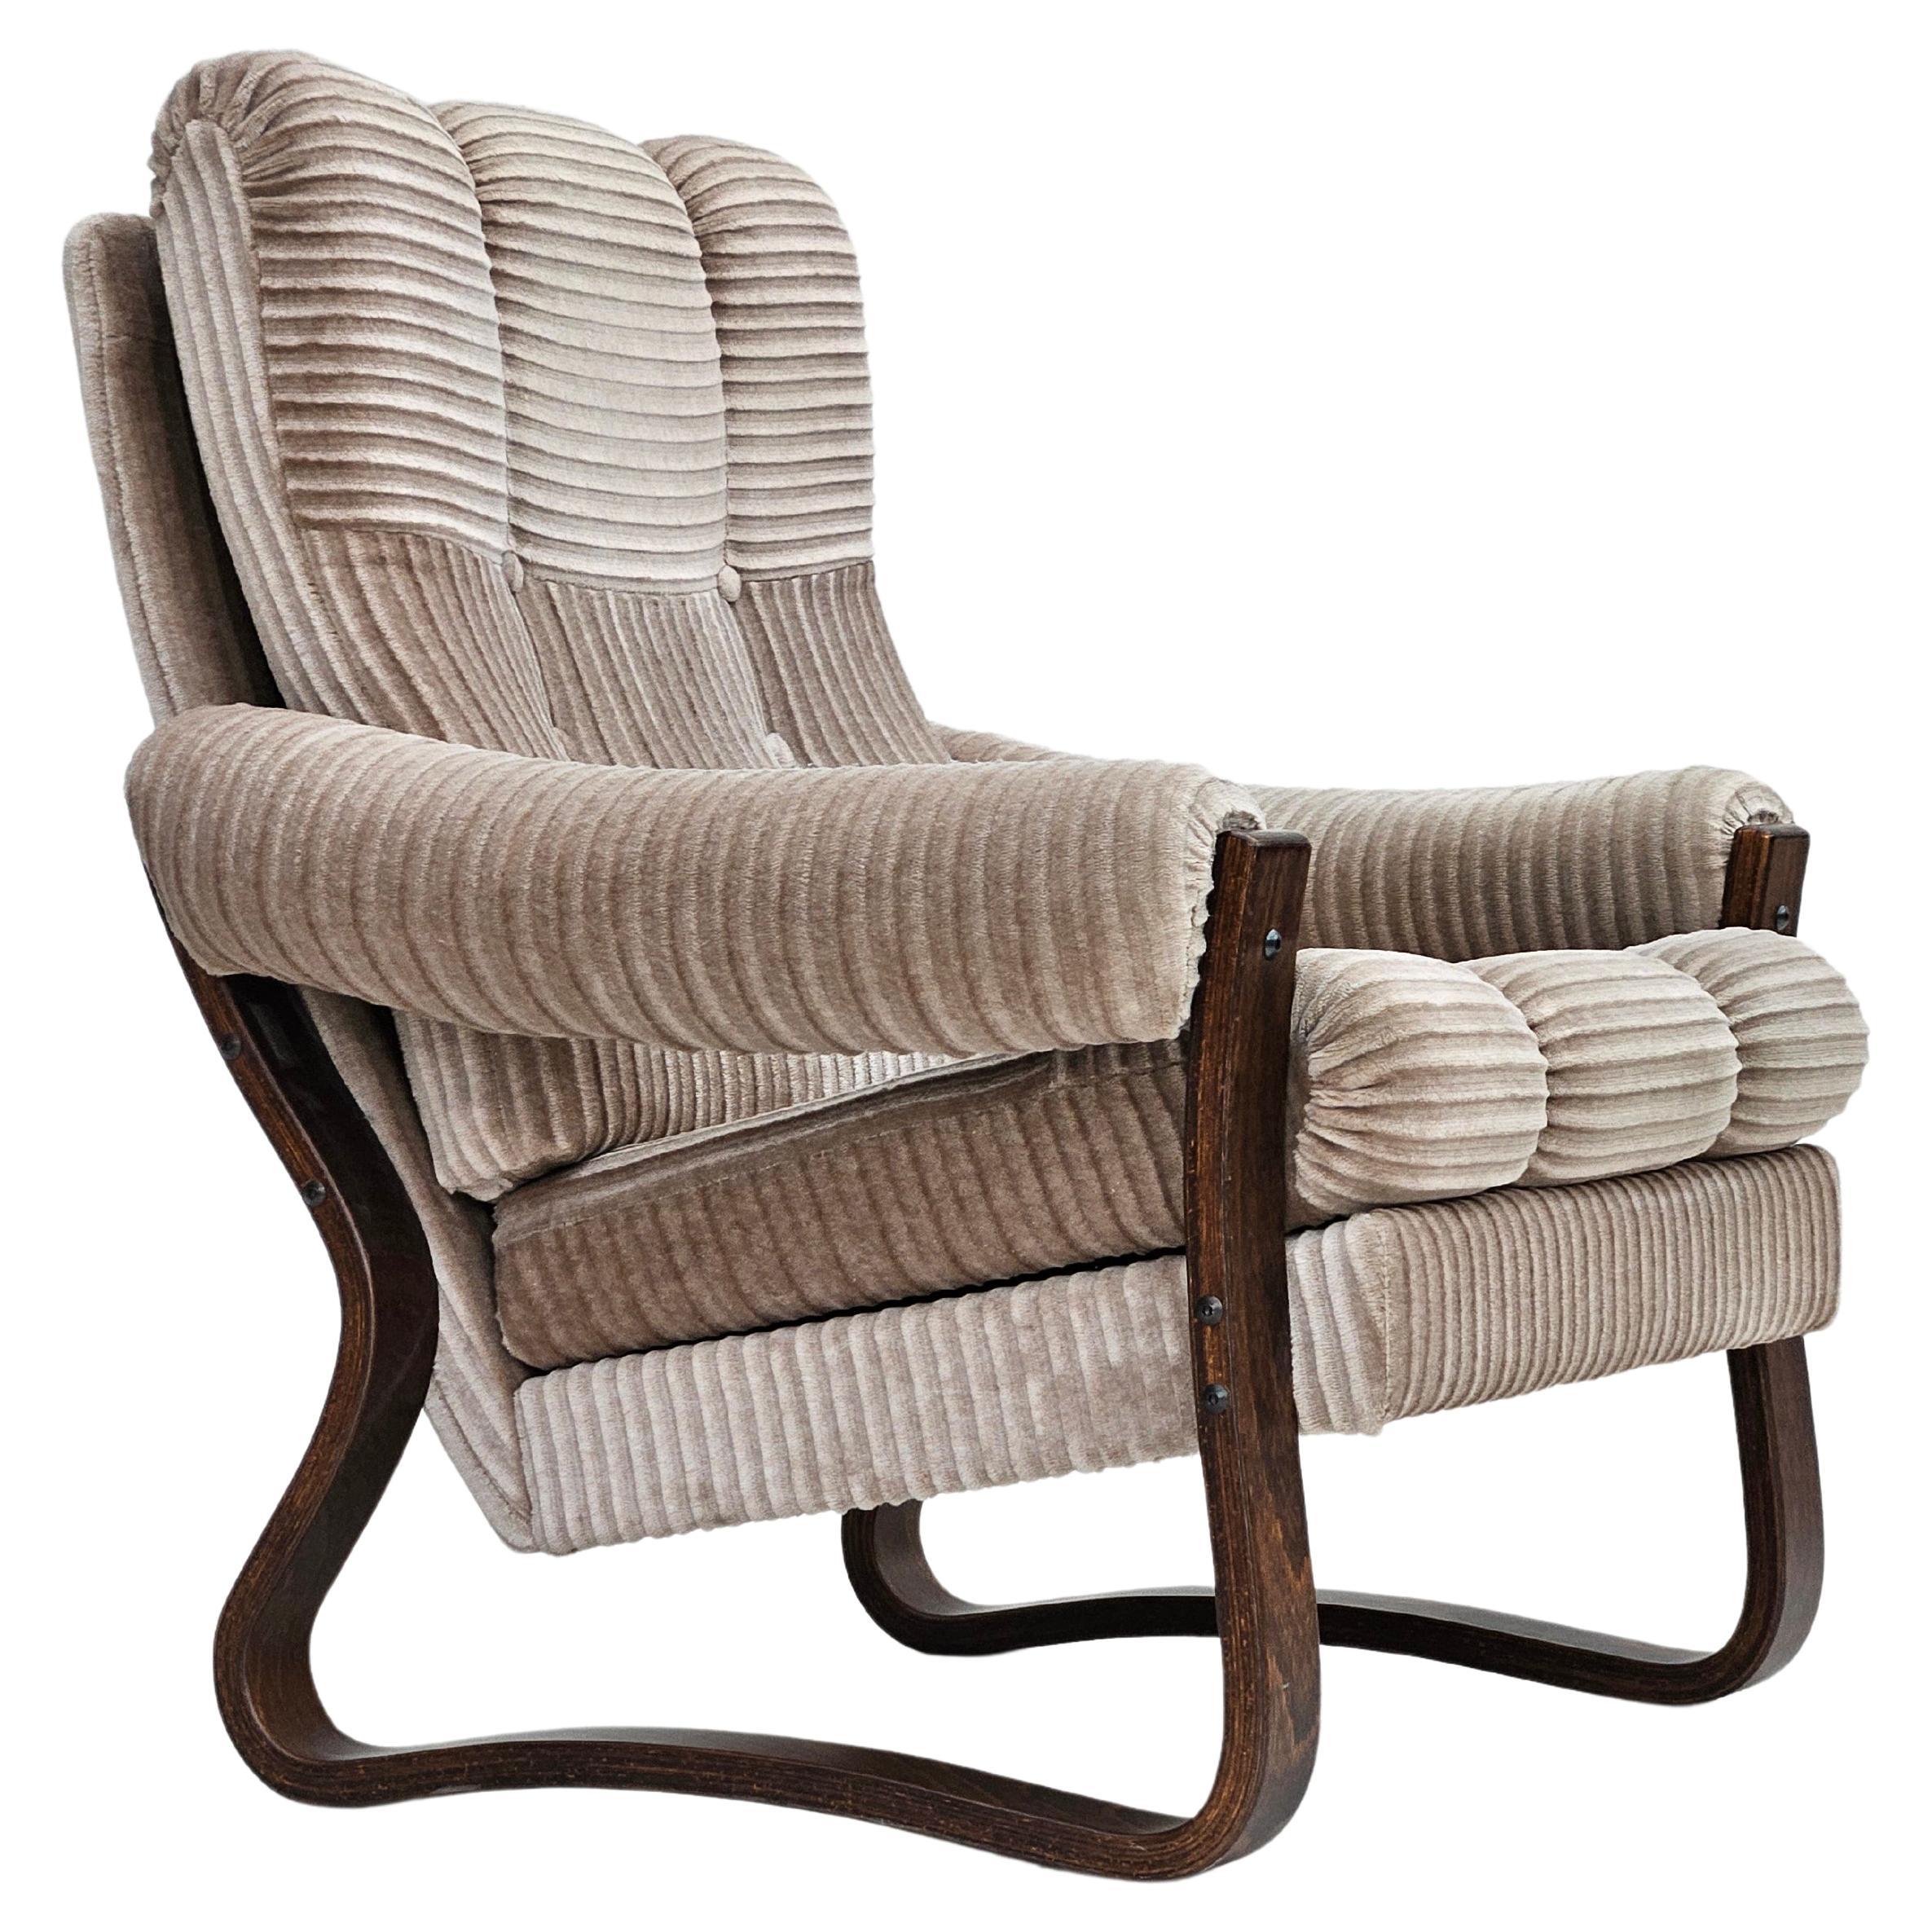 1970s, Danish lounge chair, original very good condition, corduroy. For Sale